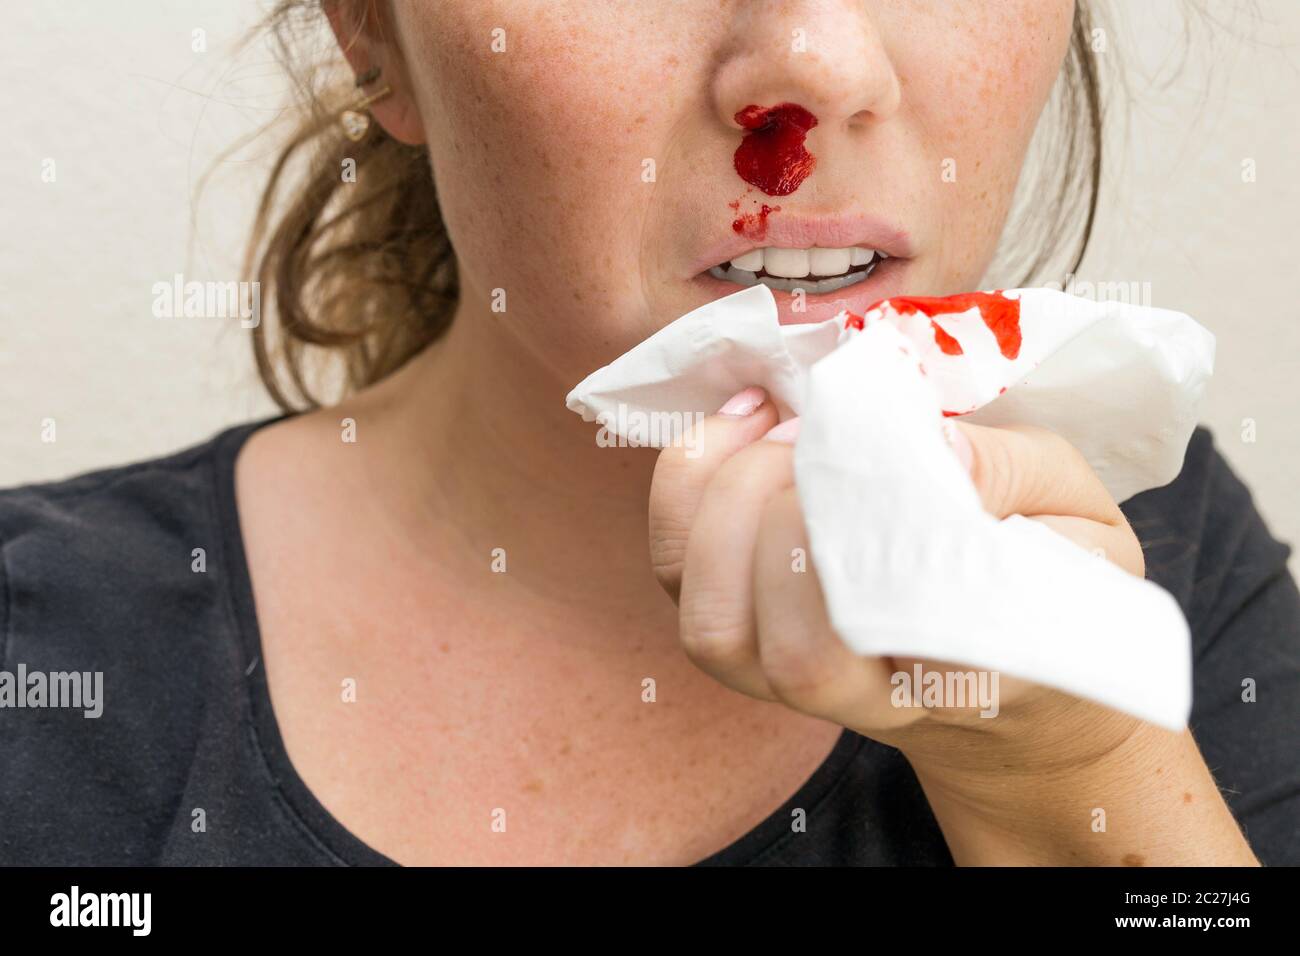 Nosebleed Injury High Resolution Stock Photography And Images Alamy